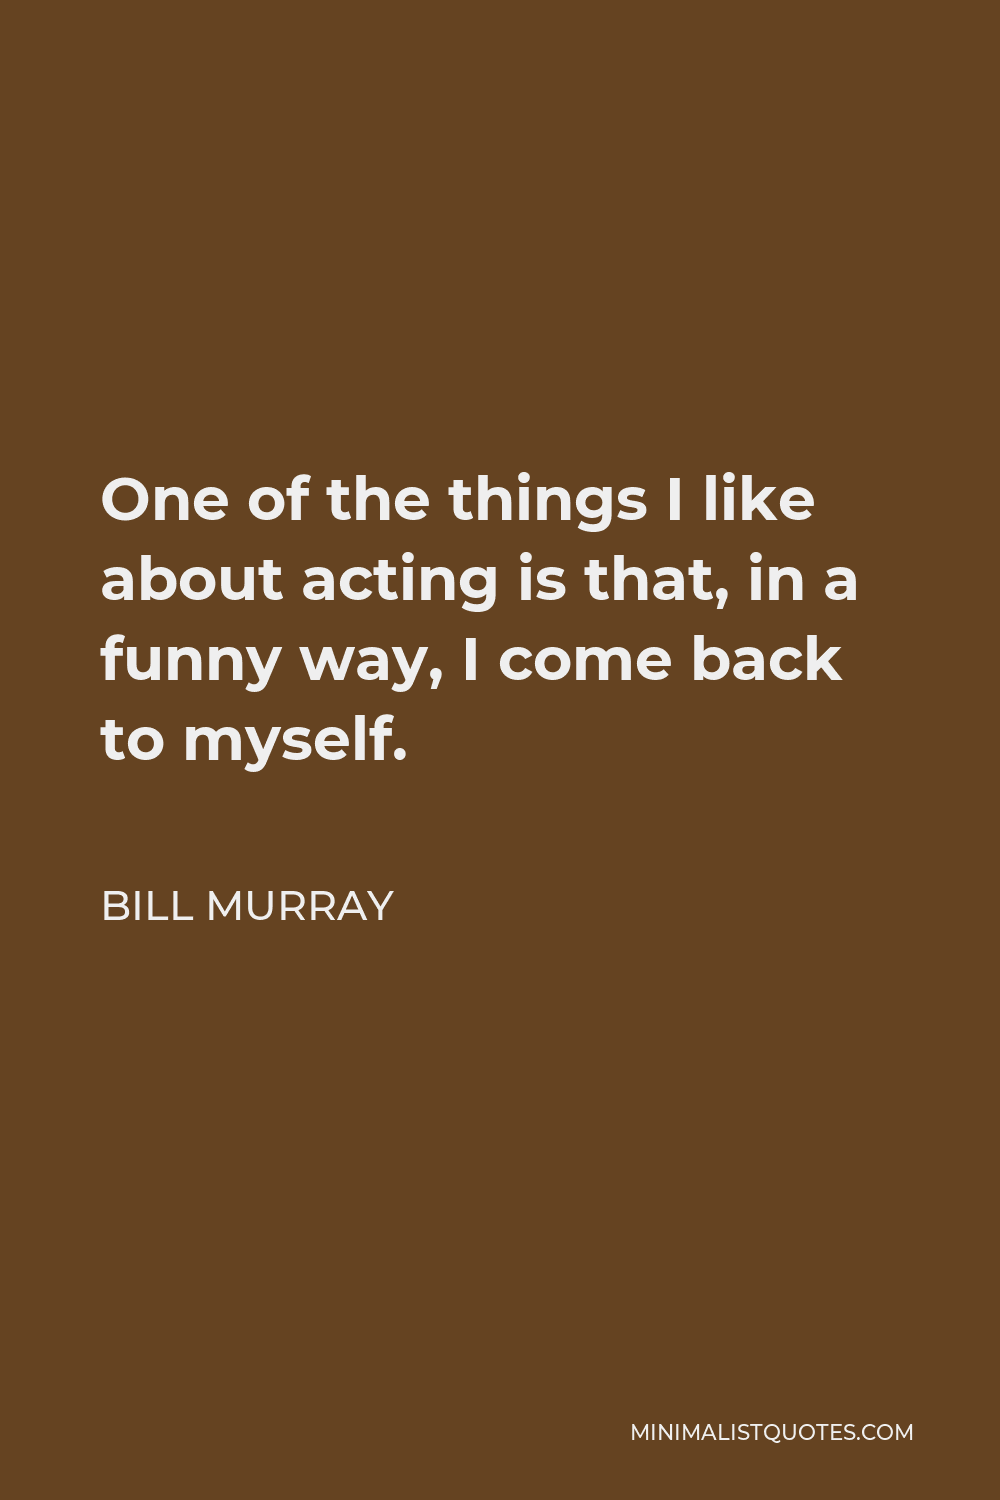 Bill Murray Quote - One of the things I like about acting is that, in a funny way, I come back to myself.